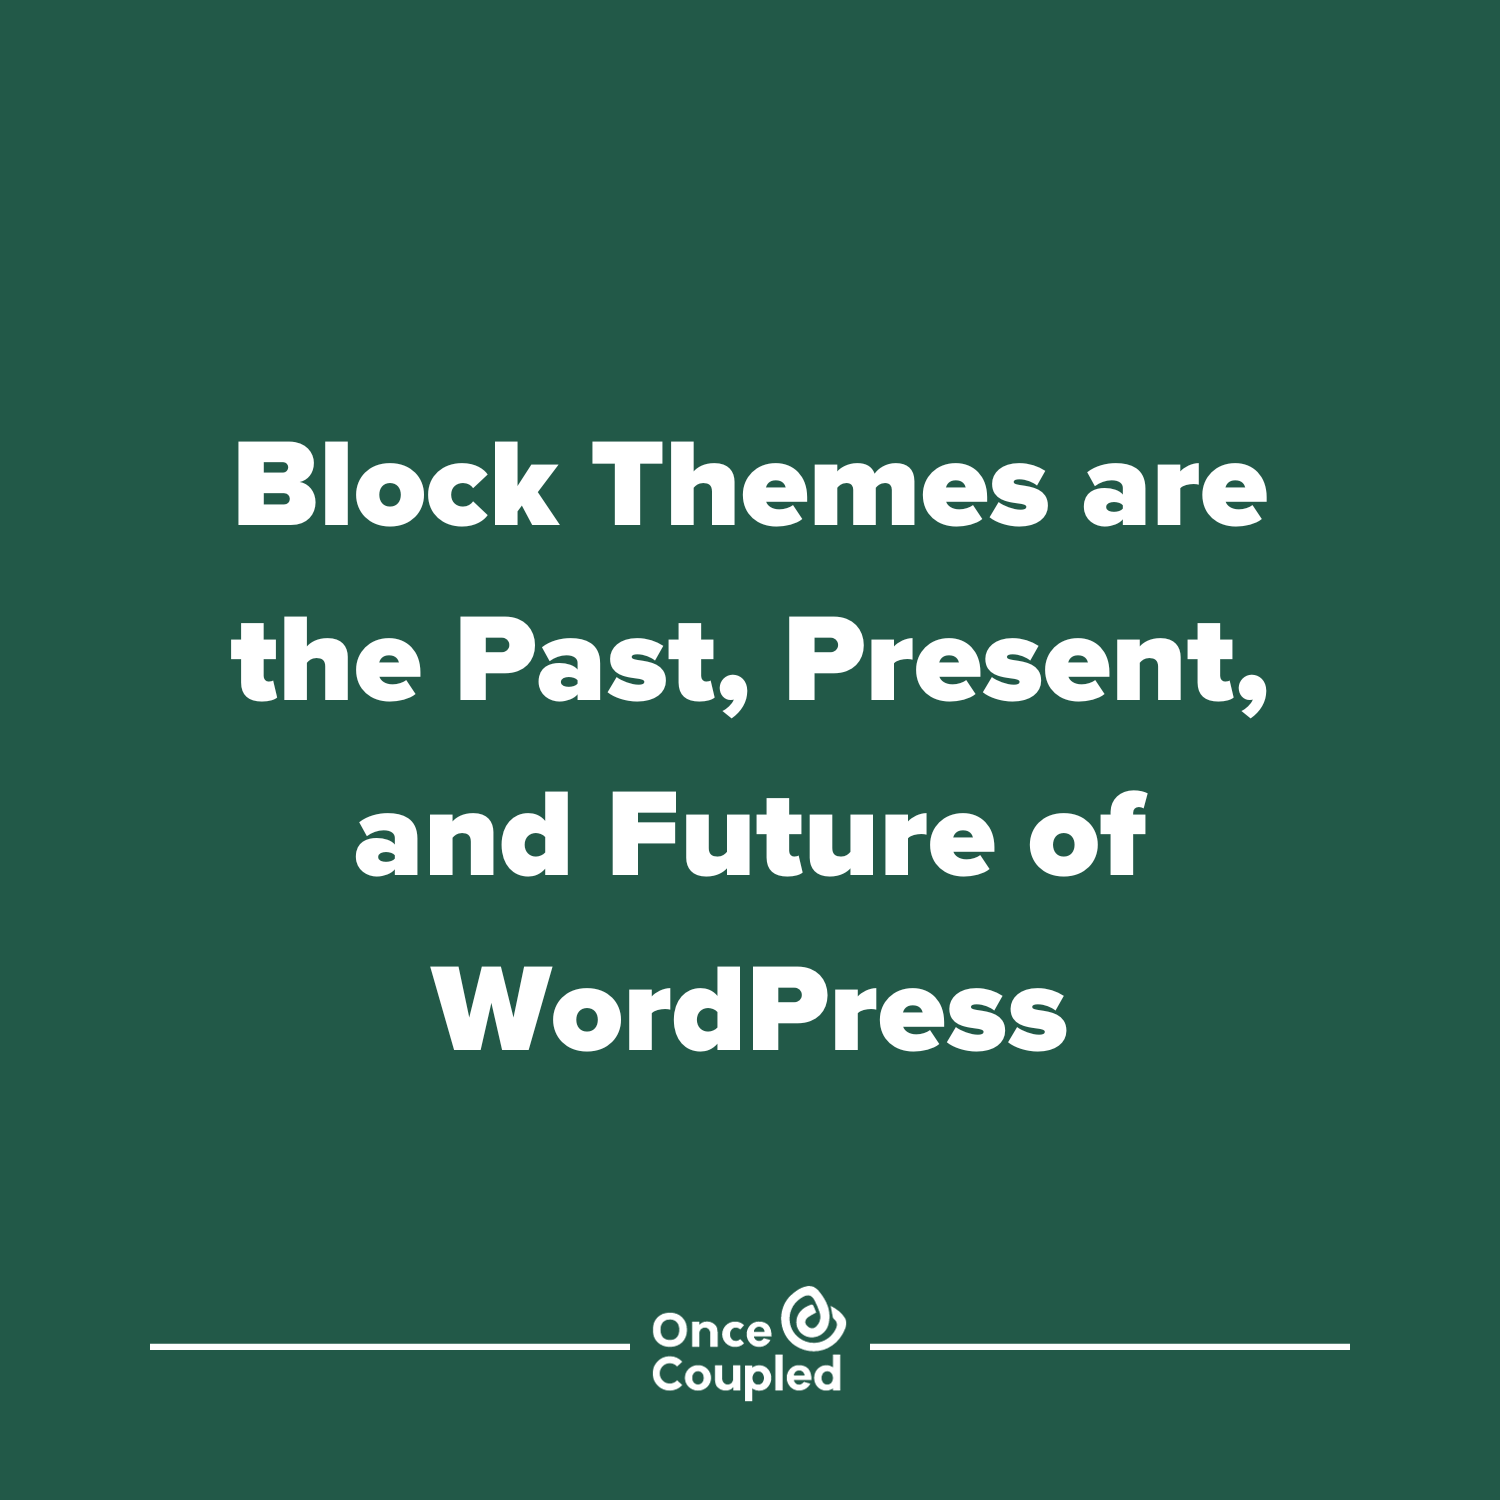 Block Themes are the Past, Present, and Future of WordPress